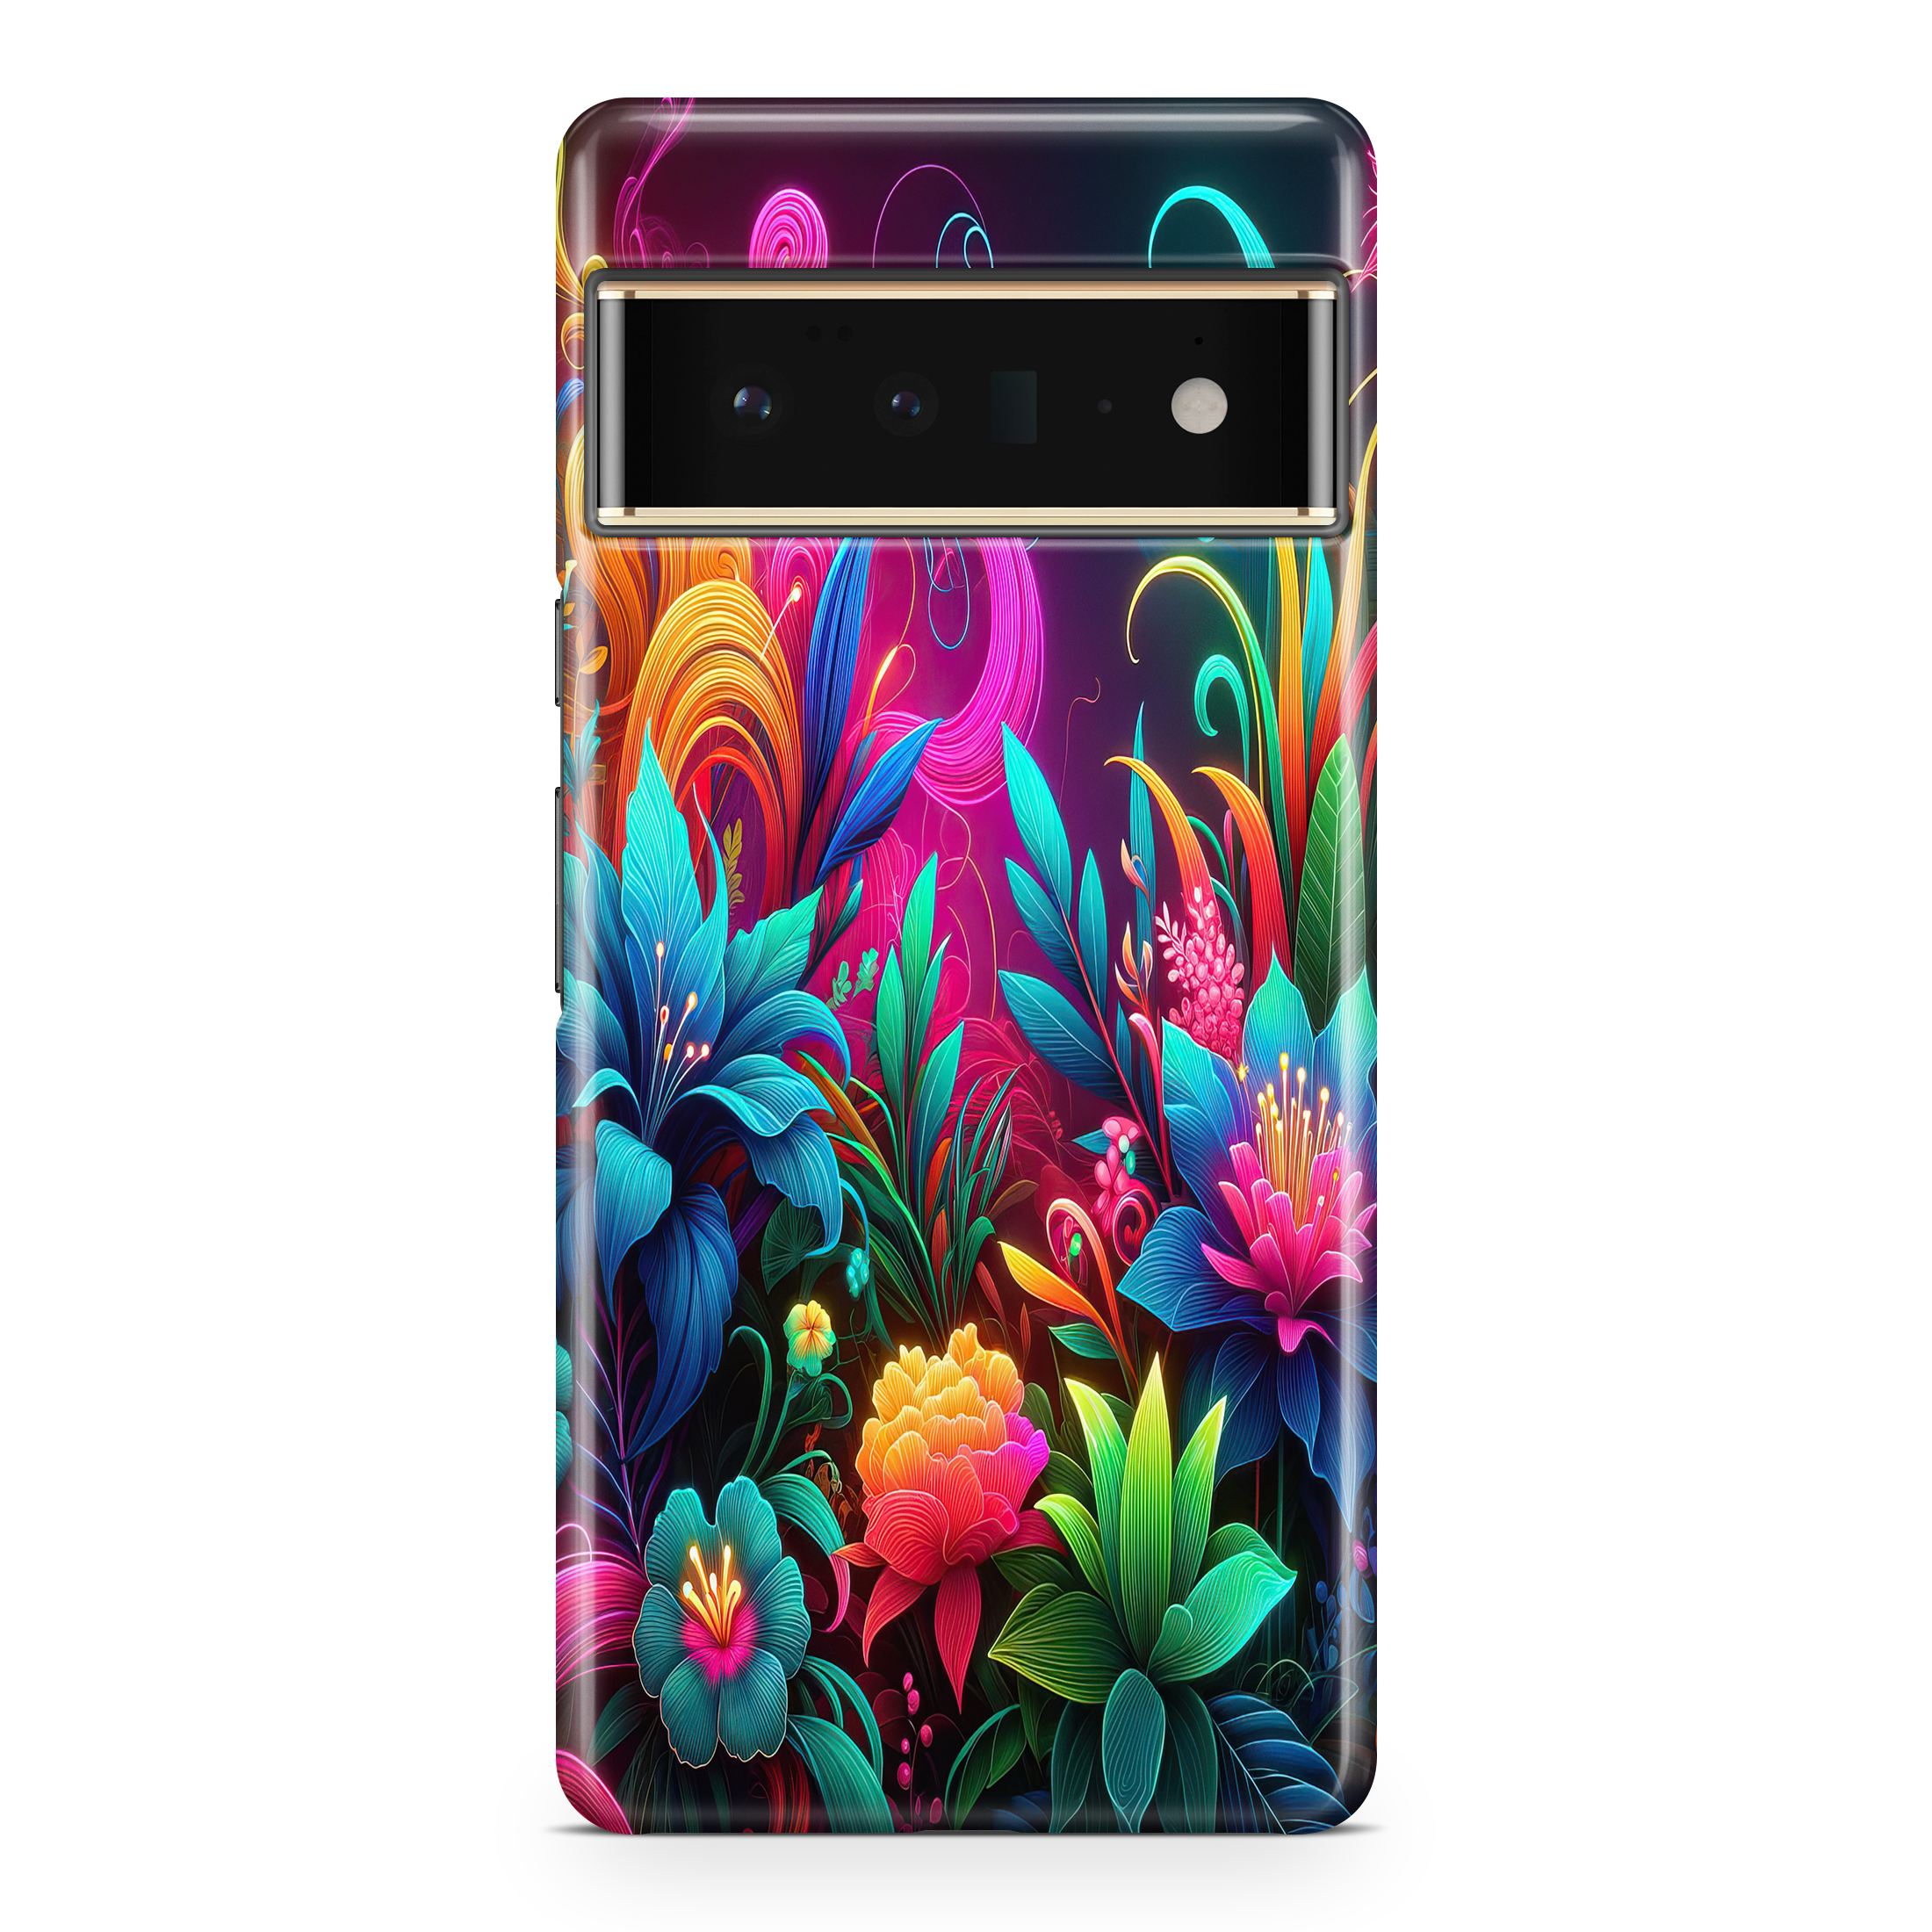 Neon Nectar - Google phone case designs by CaseSwagger